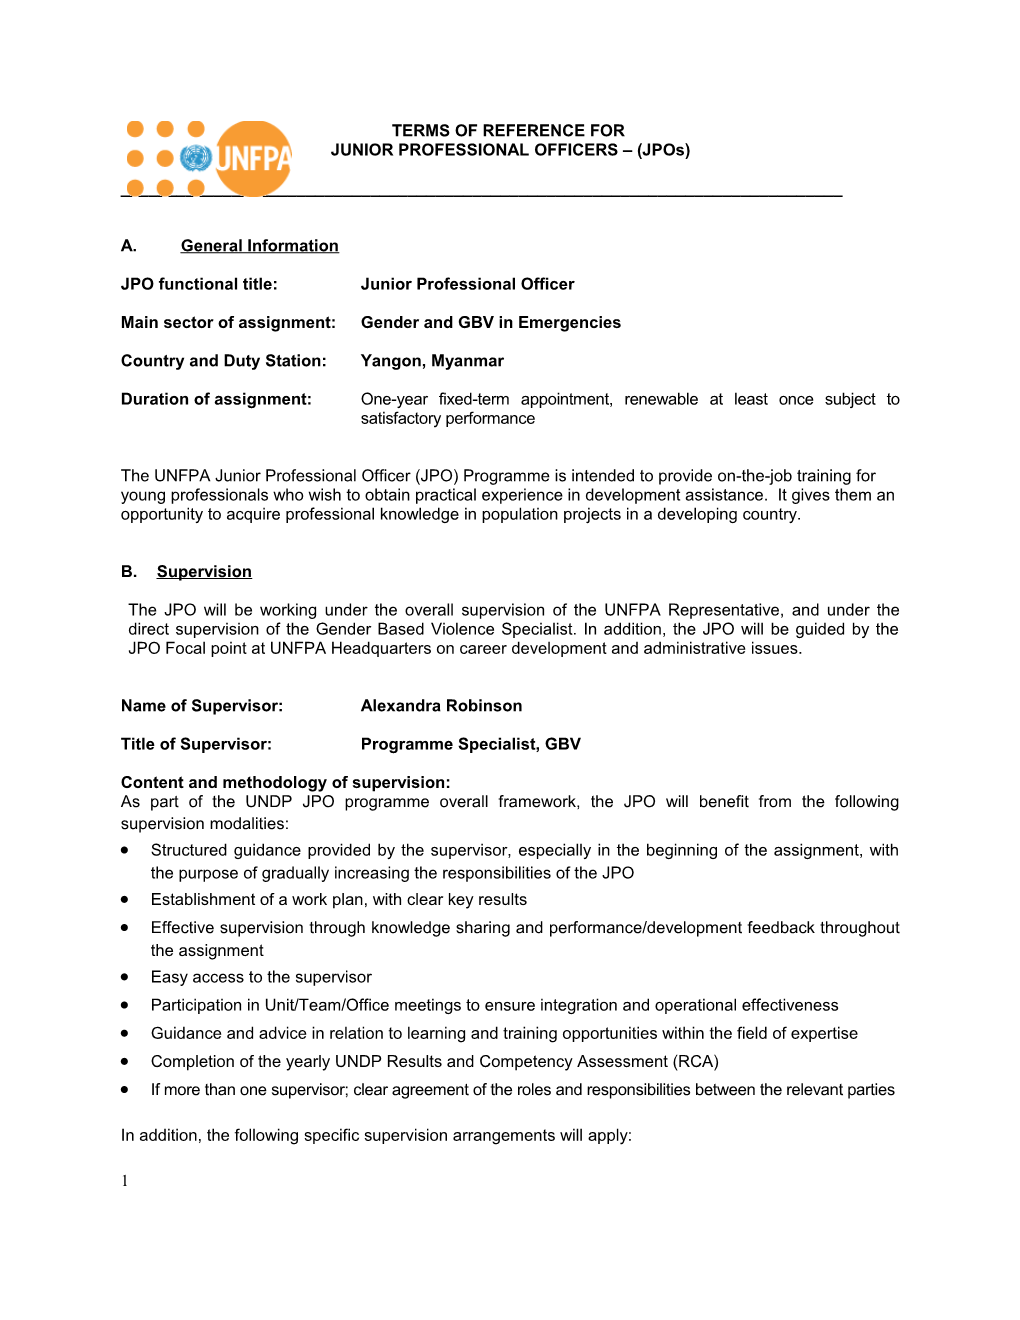 Terms of Reference for Junior Professional Officer for the Unfpa Kenya Field Office